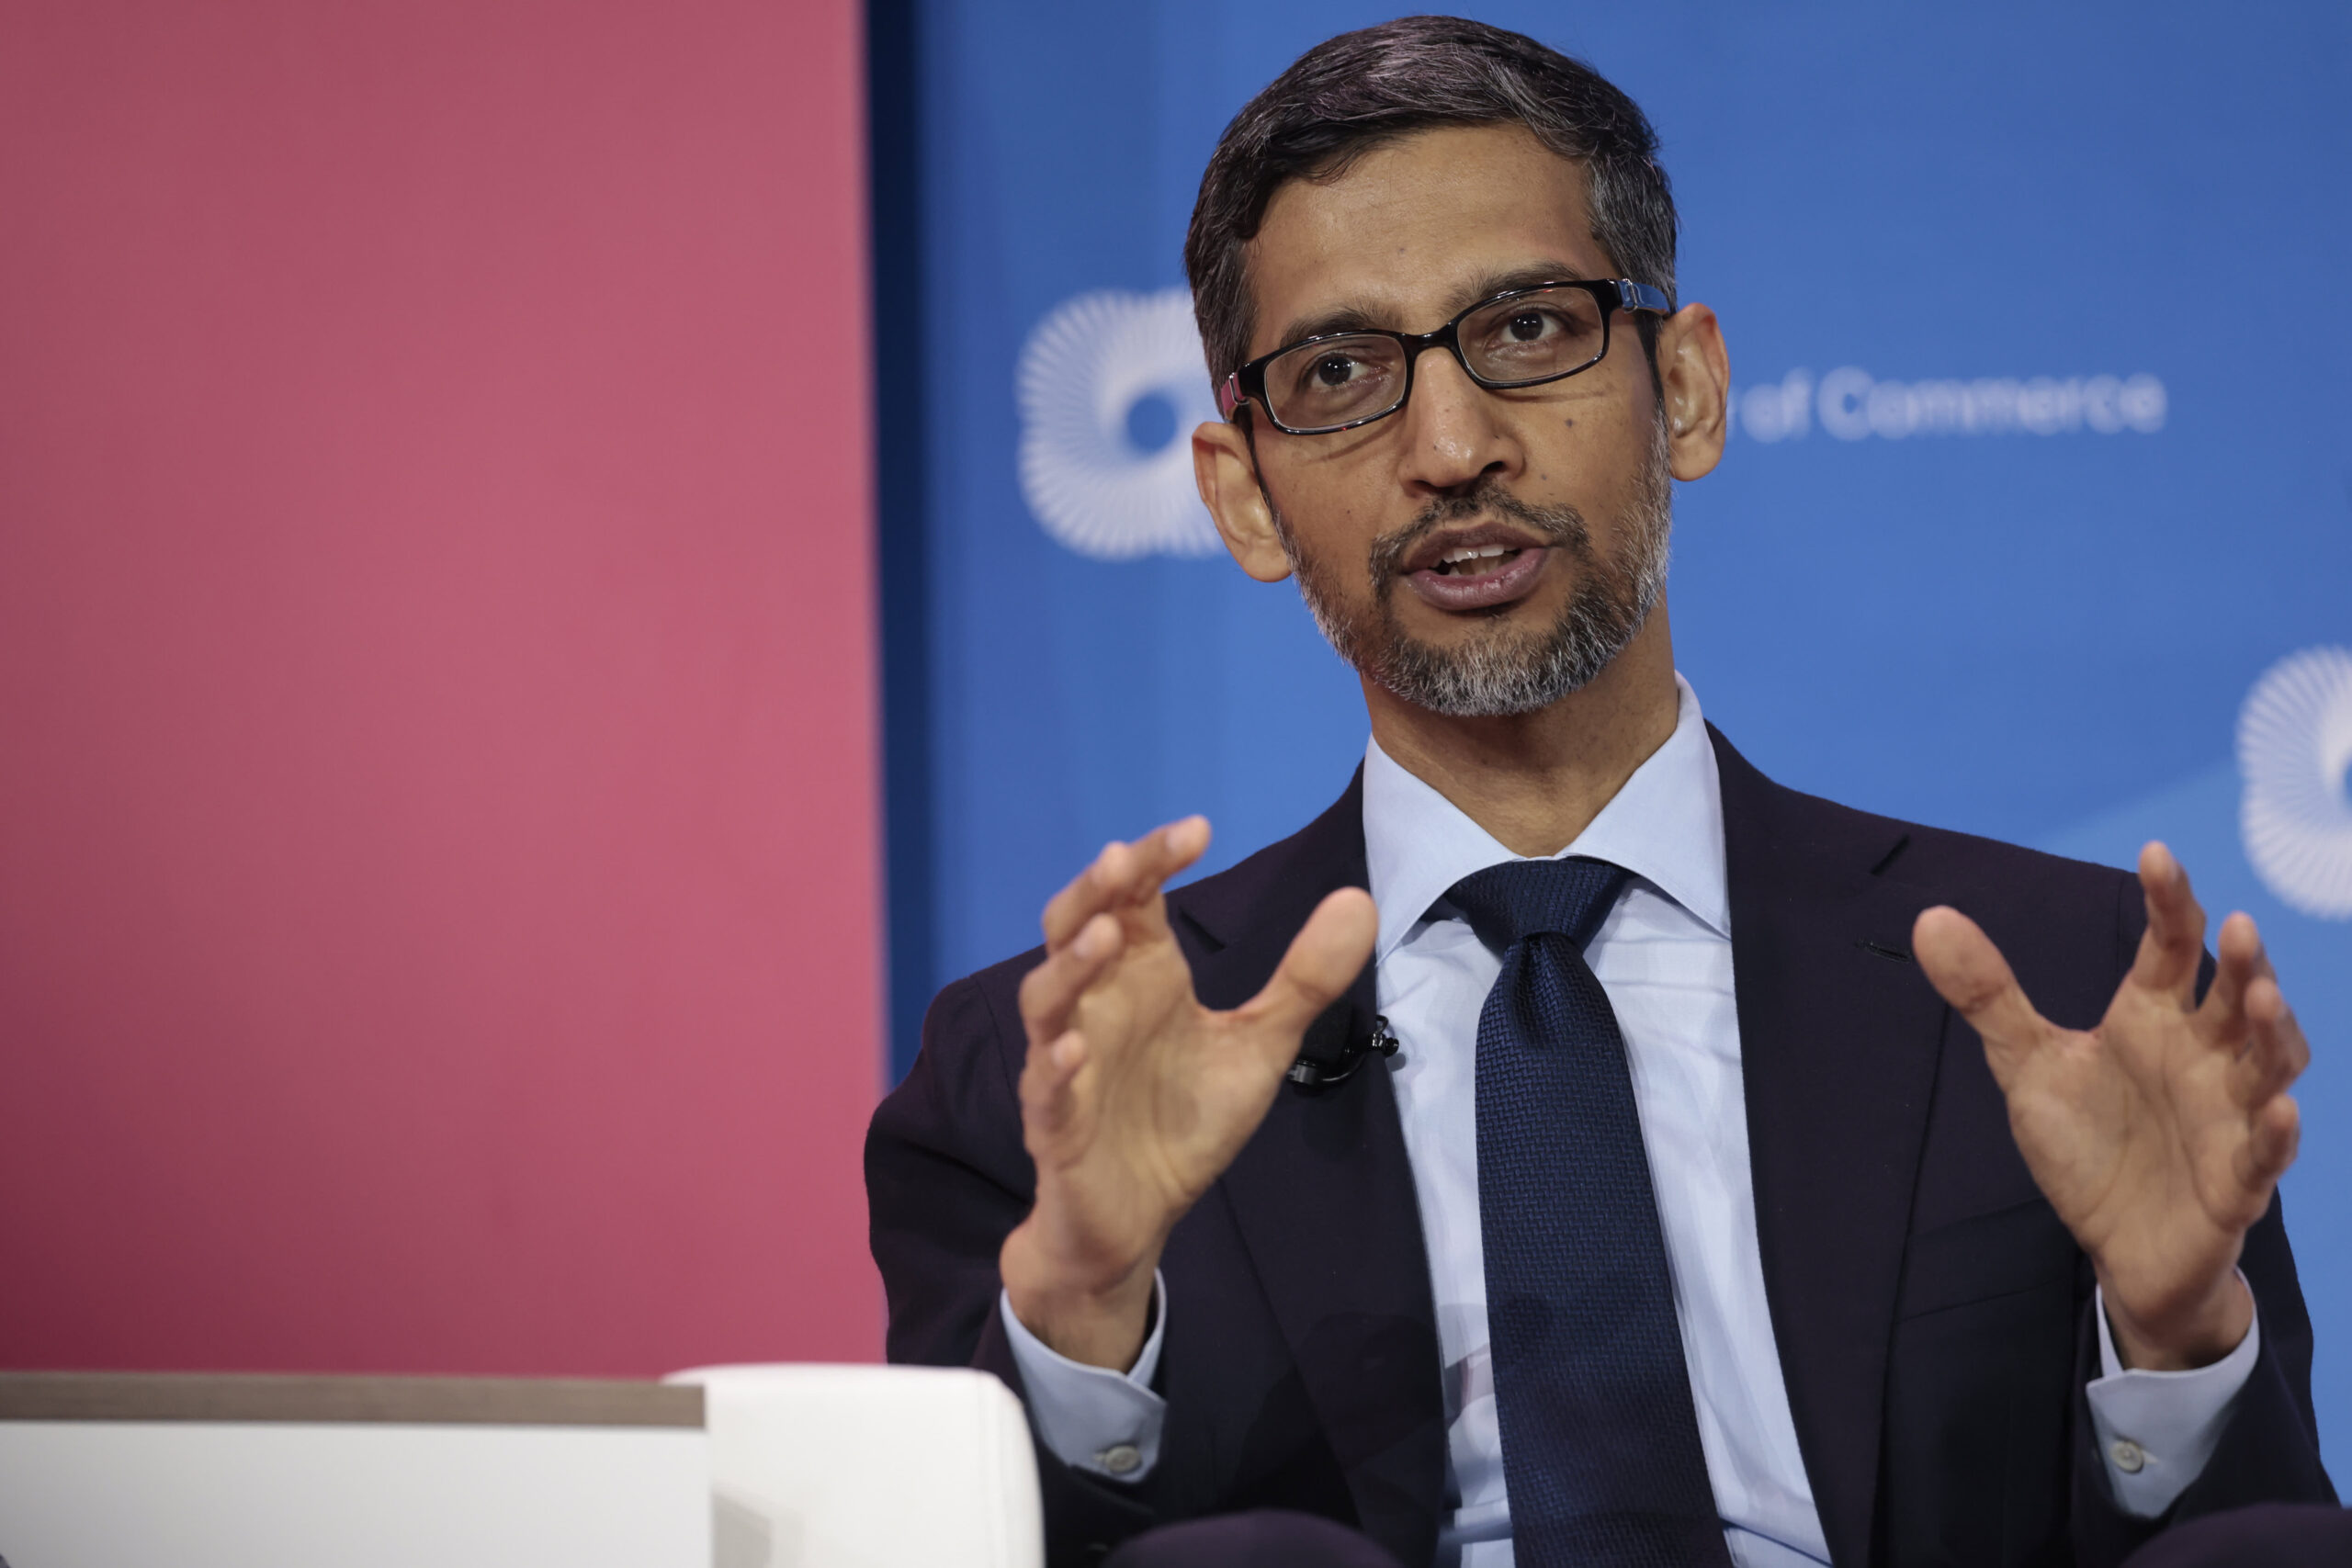 Google CEO Signals More Job Reductions in the Coming Months